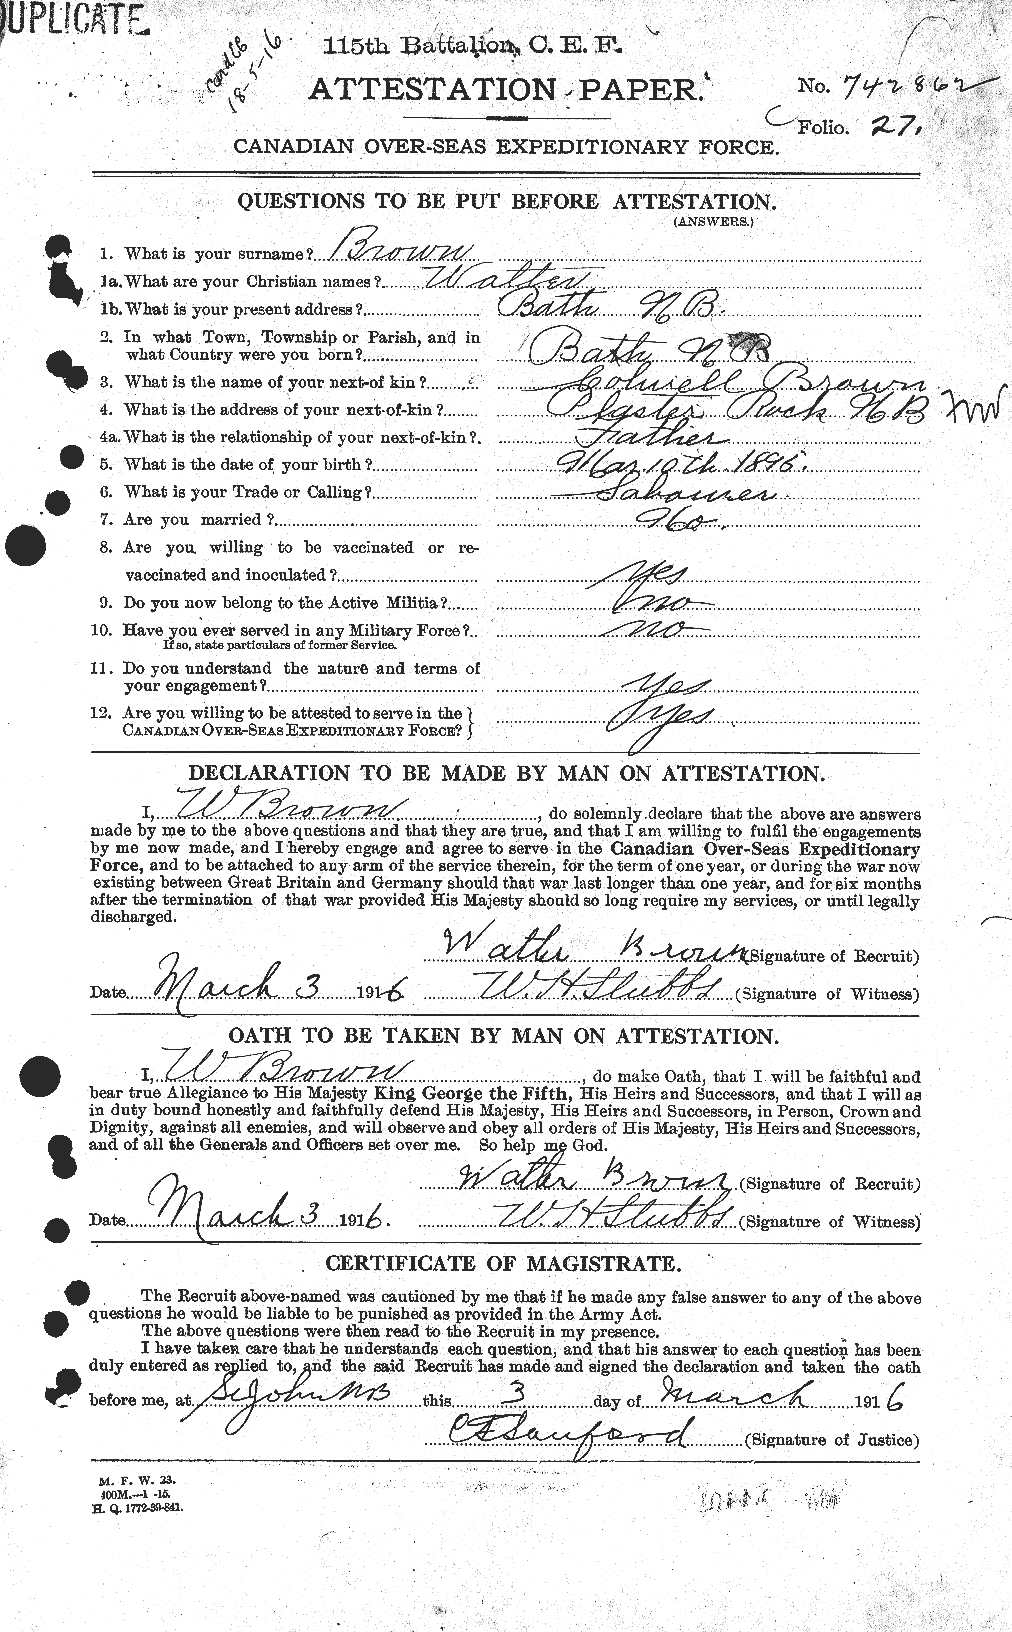 Personnel Records of the First World War - CEF 266653a